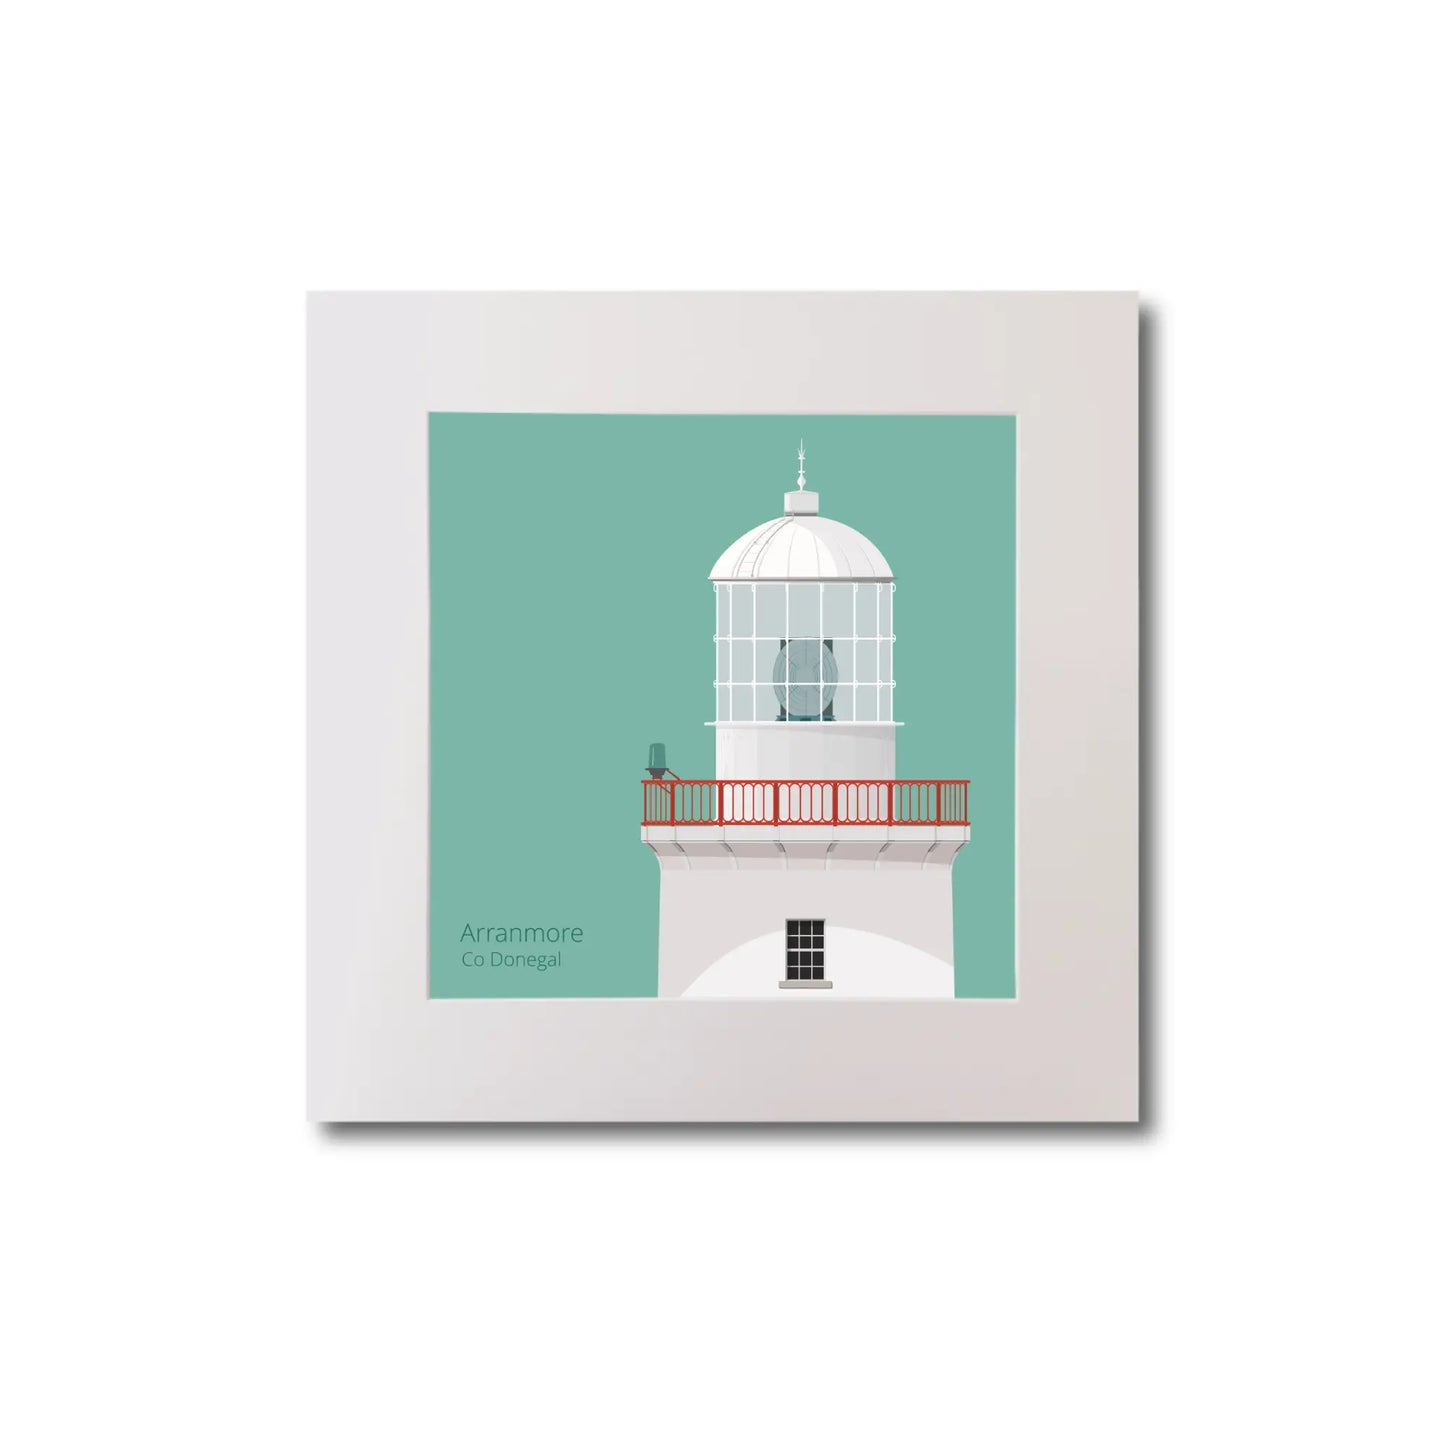 Illustration of Arranmore lighthouse on an ocean green background, mounted and measuring 20x20cm.